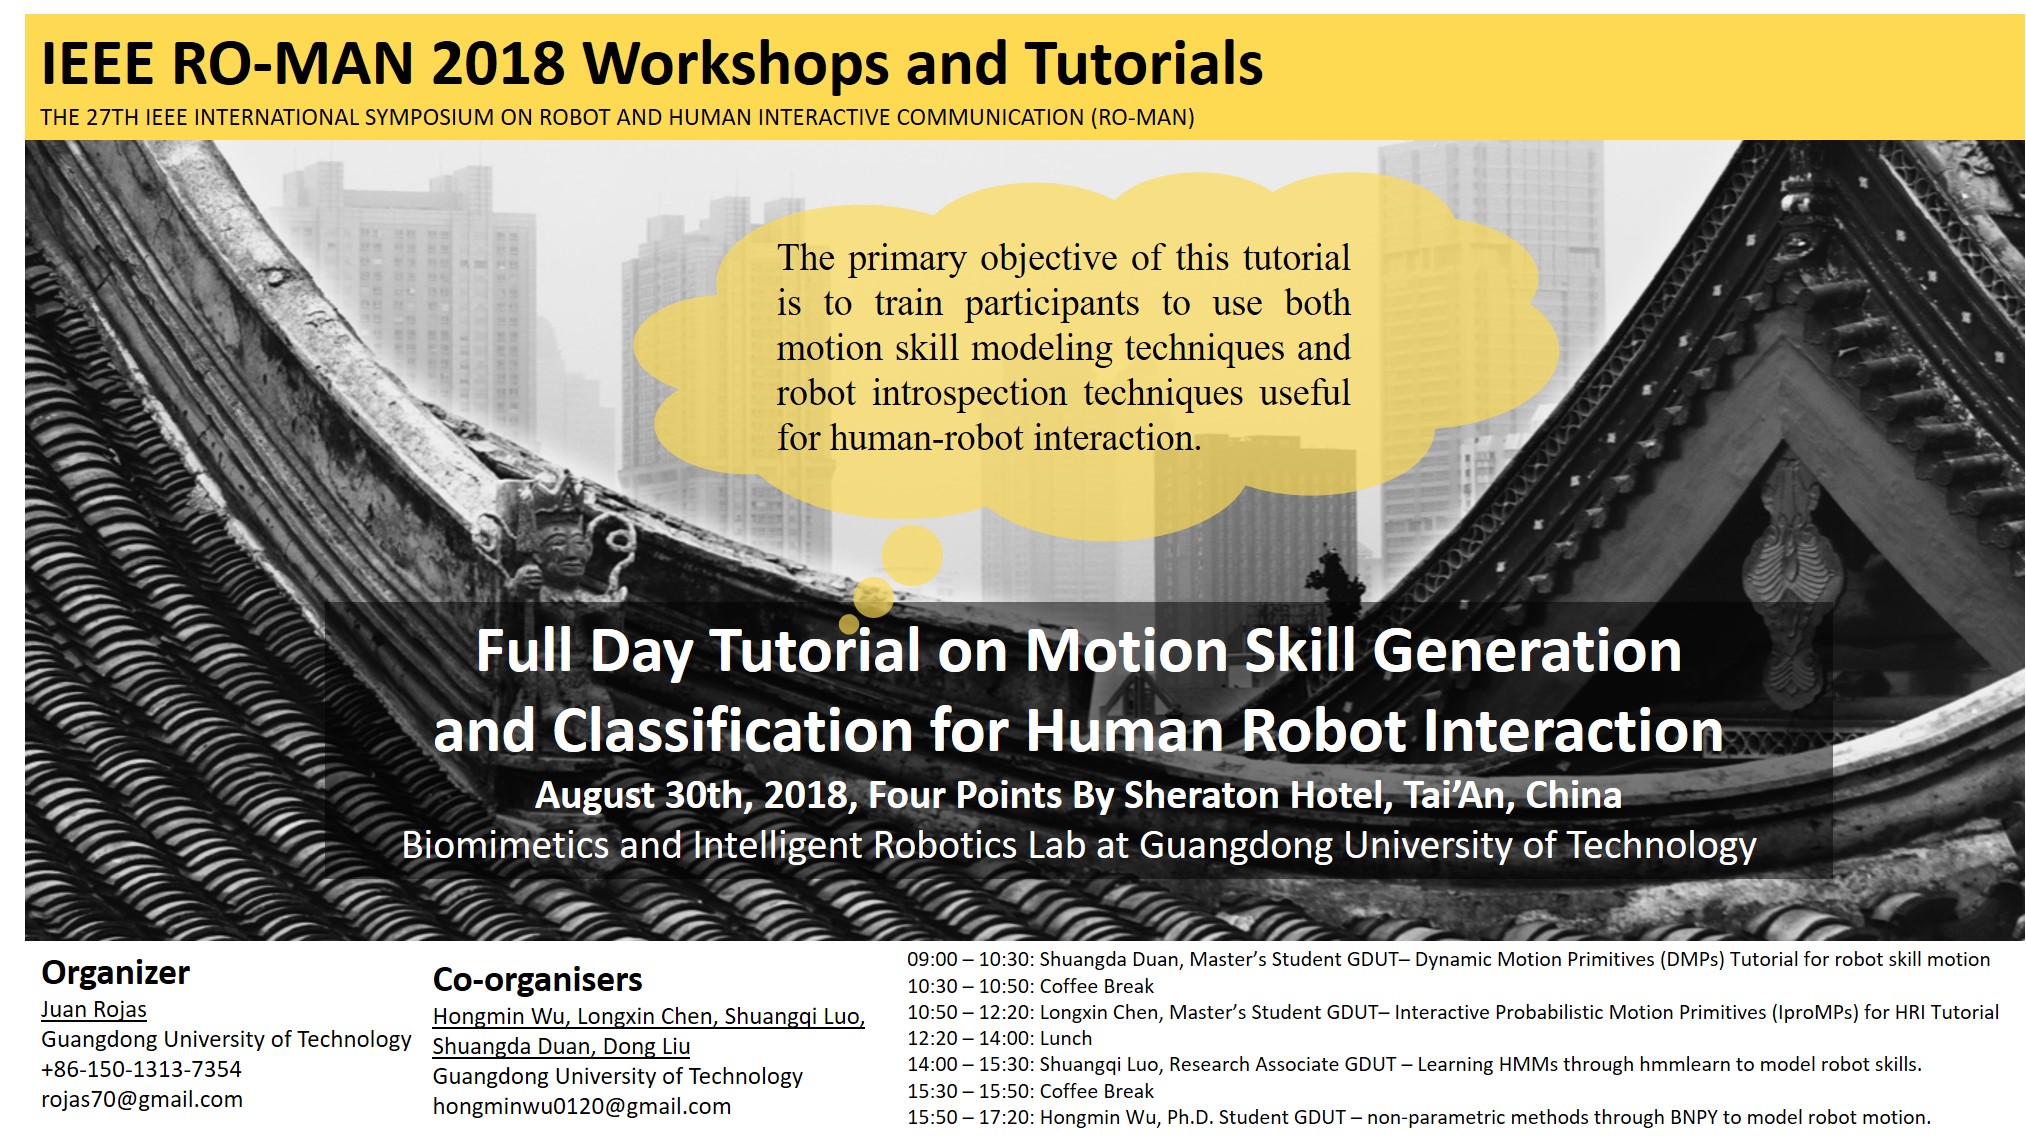 IEEE RO-MAN Conference Tutorial